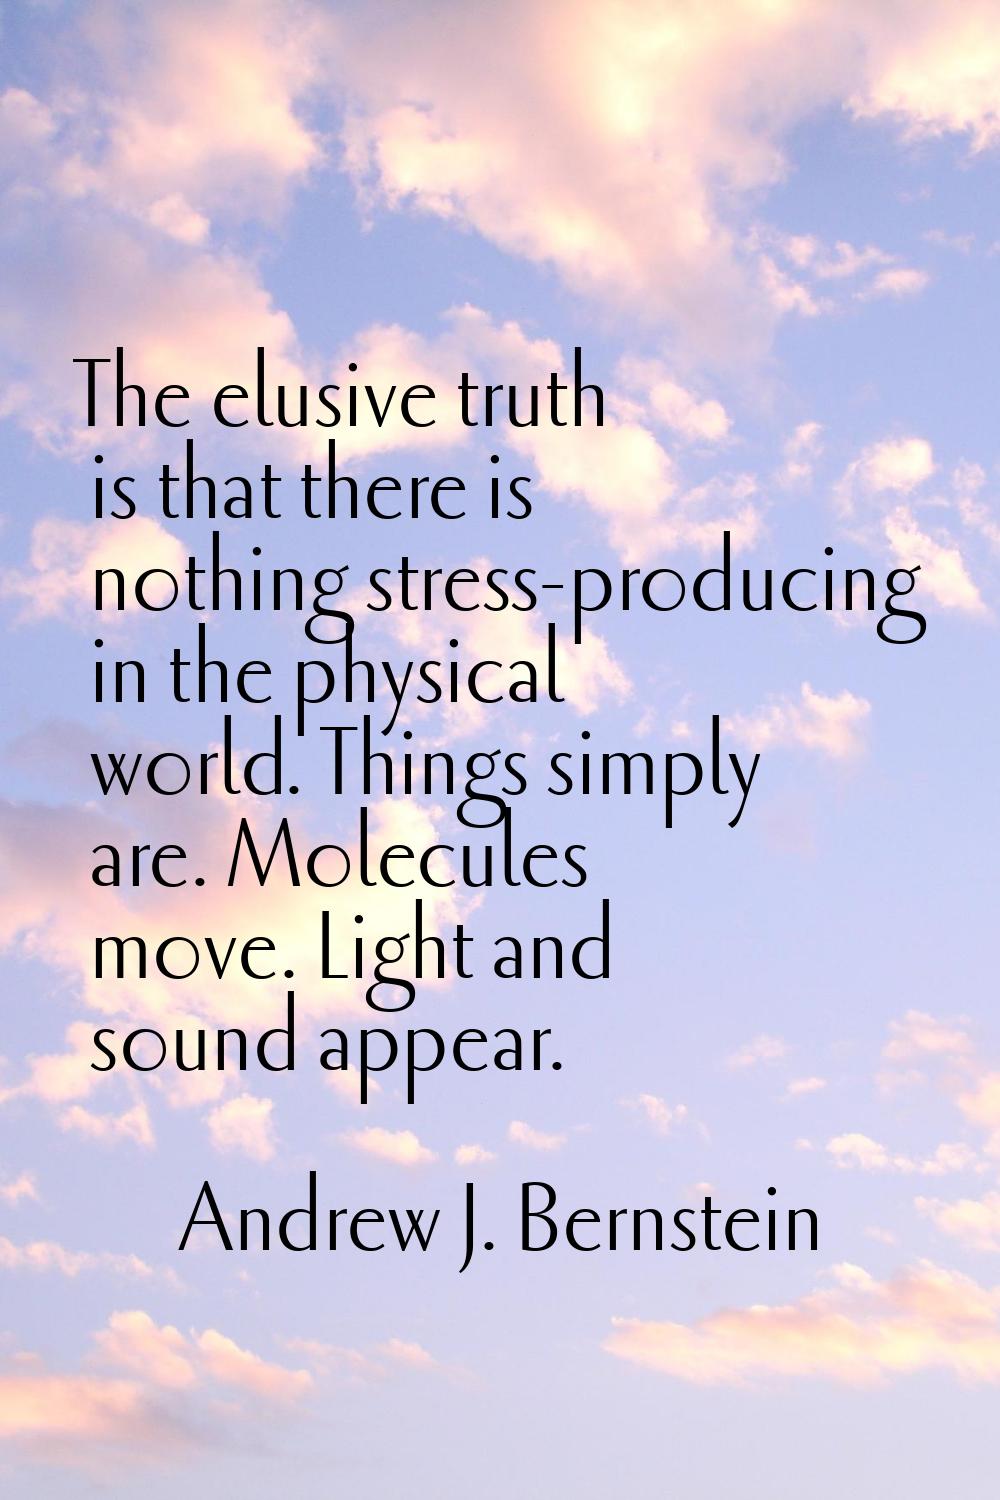 The elusive truth is that there is nothing stress-producing in the physical world. Things simply ar